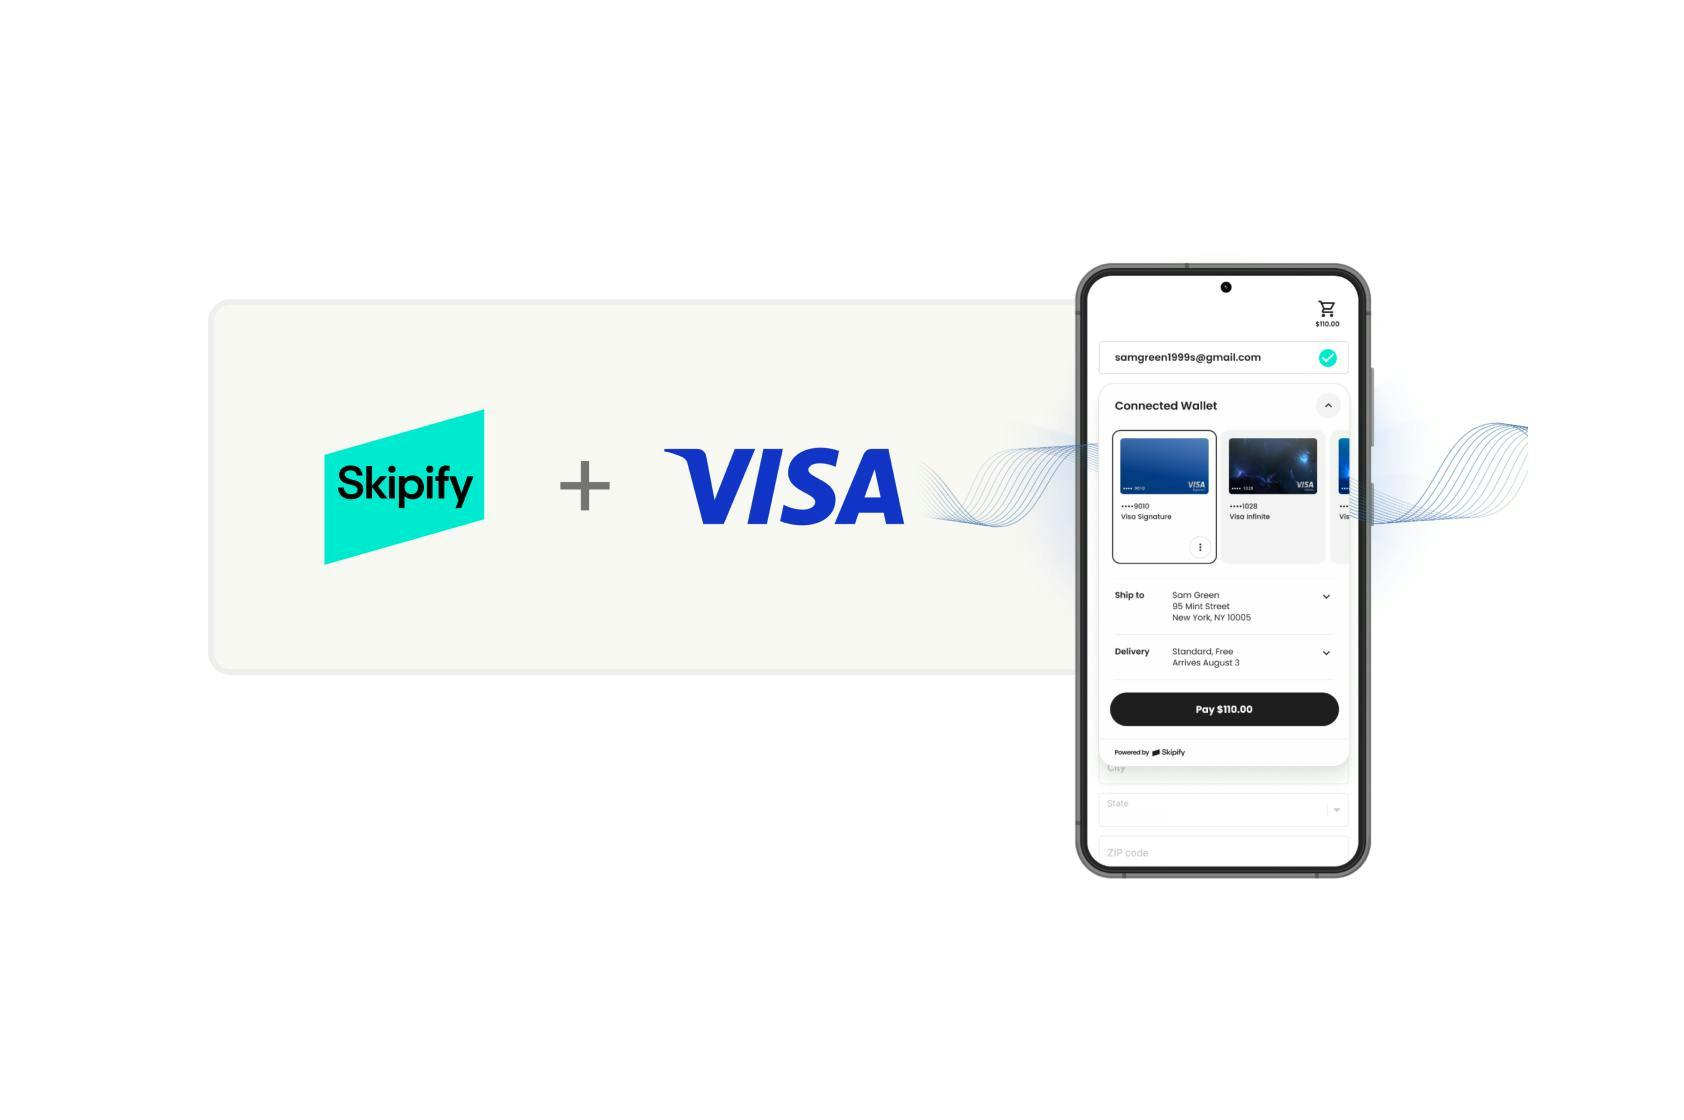 Skipify and Visa logo next to an image of a phone with the Skipify Connected Wallet with Visa cards